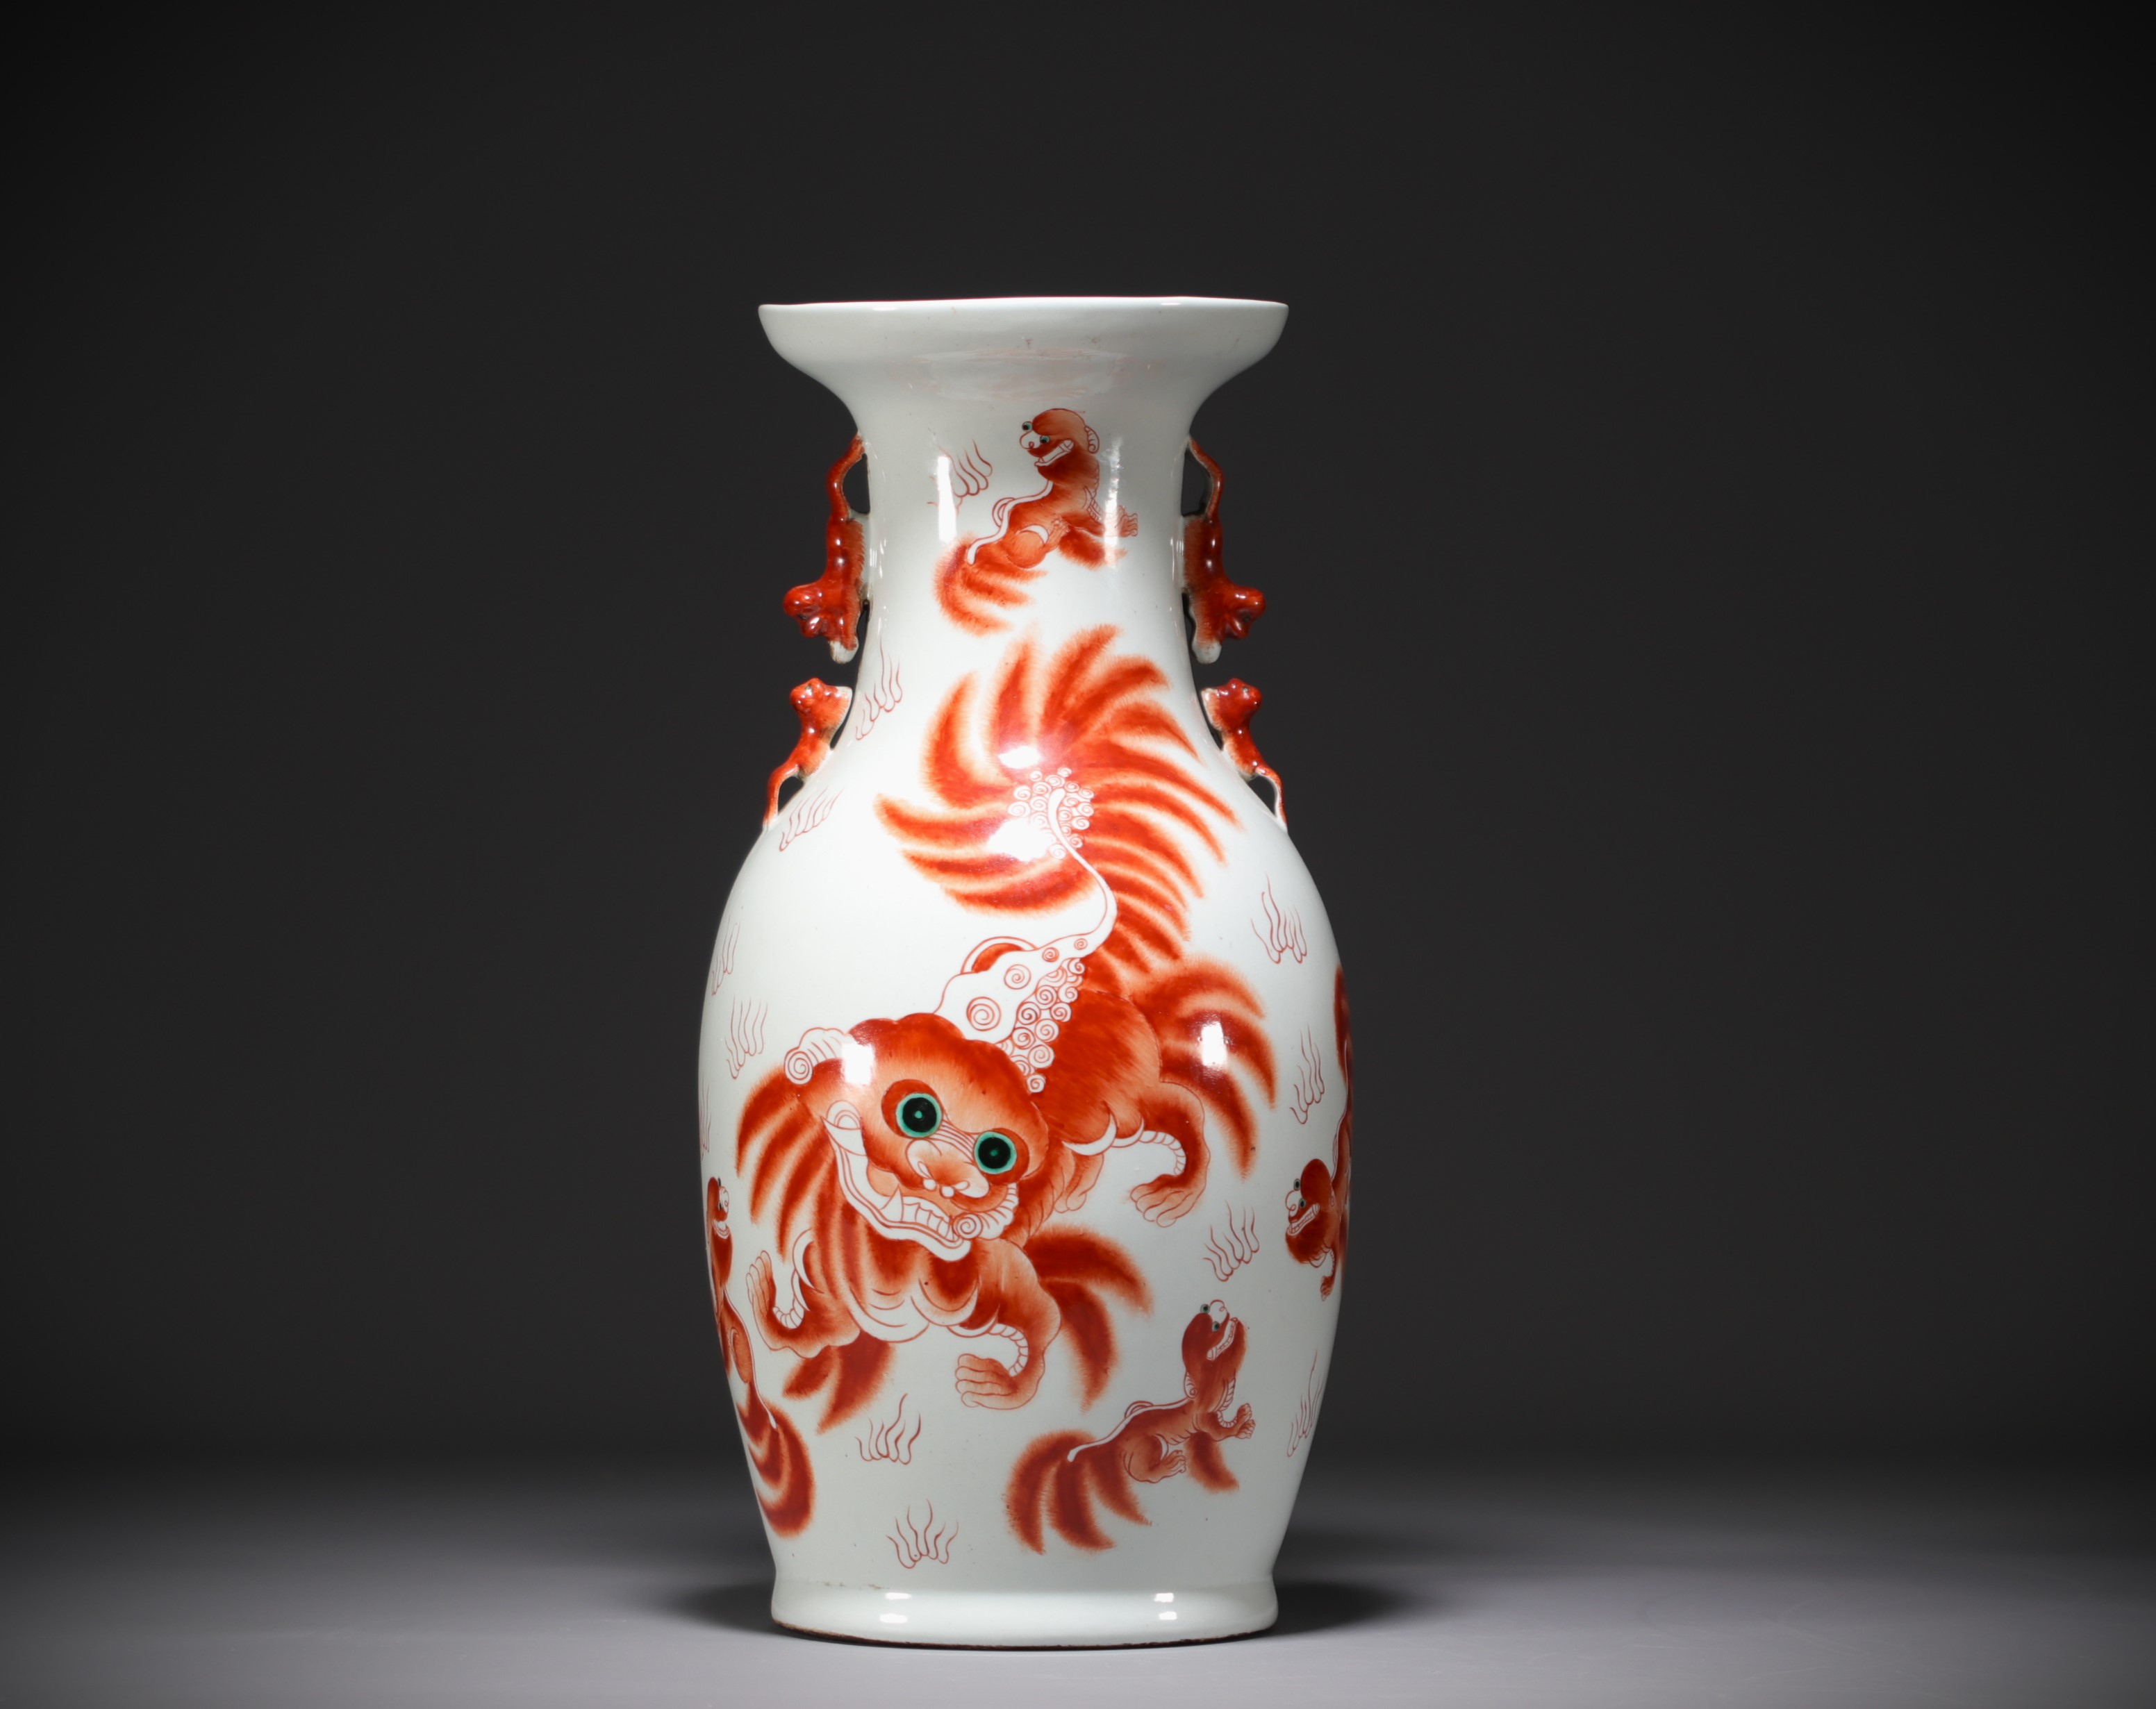 China - Large porcelain vase decorated with a Fo dog and calligraphy.